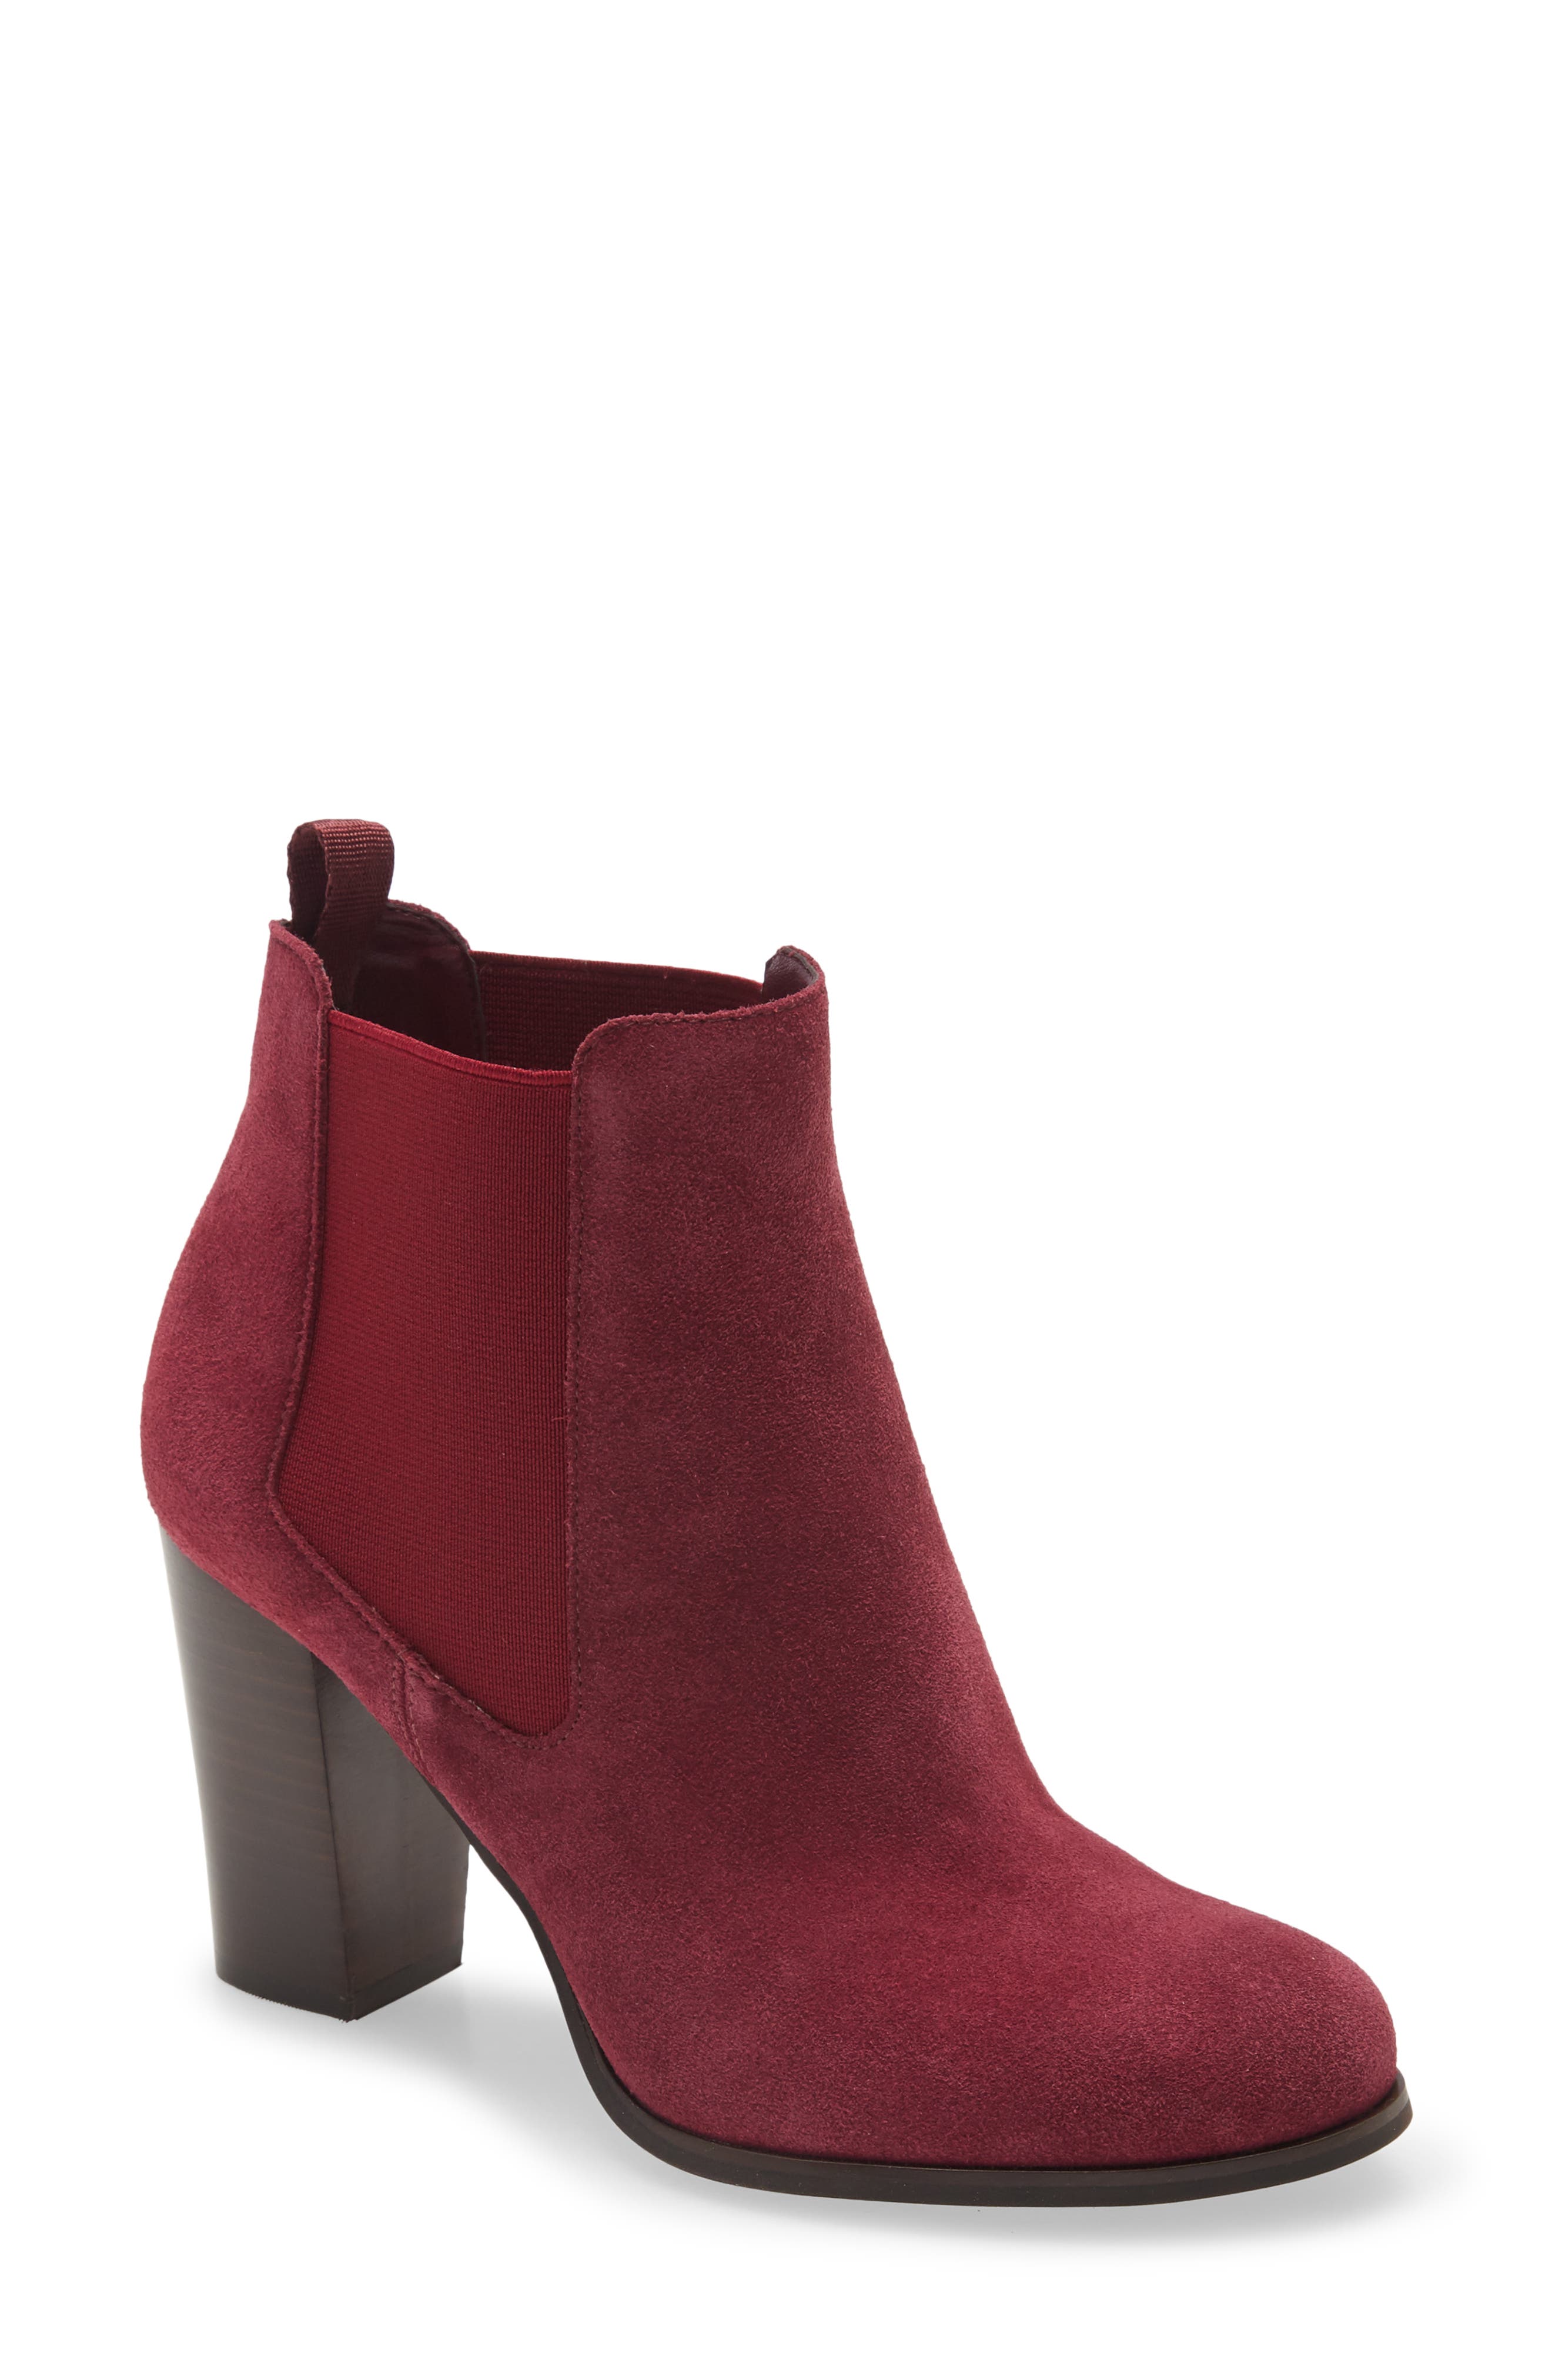 UPC 195512469305 product image for MICHAEL Michael Kors Lottie Chelsea Boot in Dark Berry at Nordstrom, Size 7 | upcitemdb.com